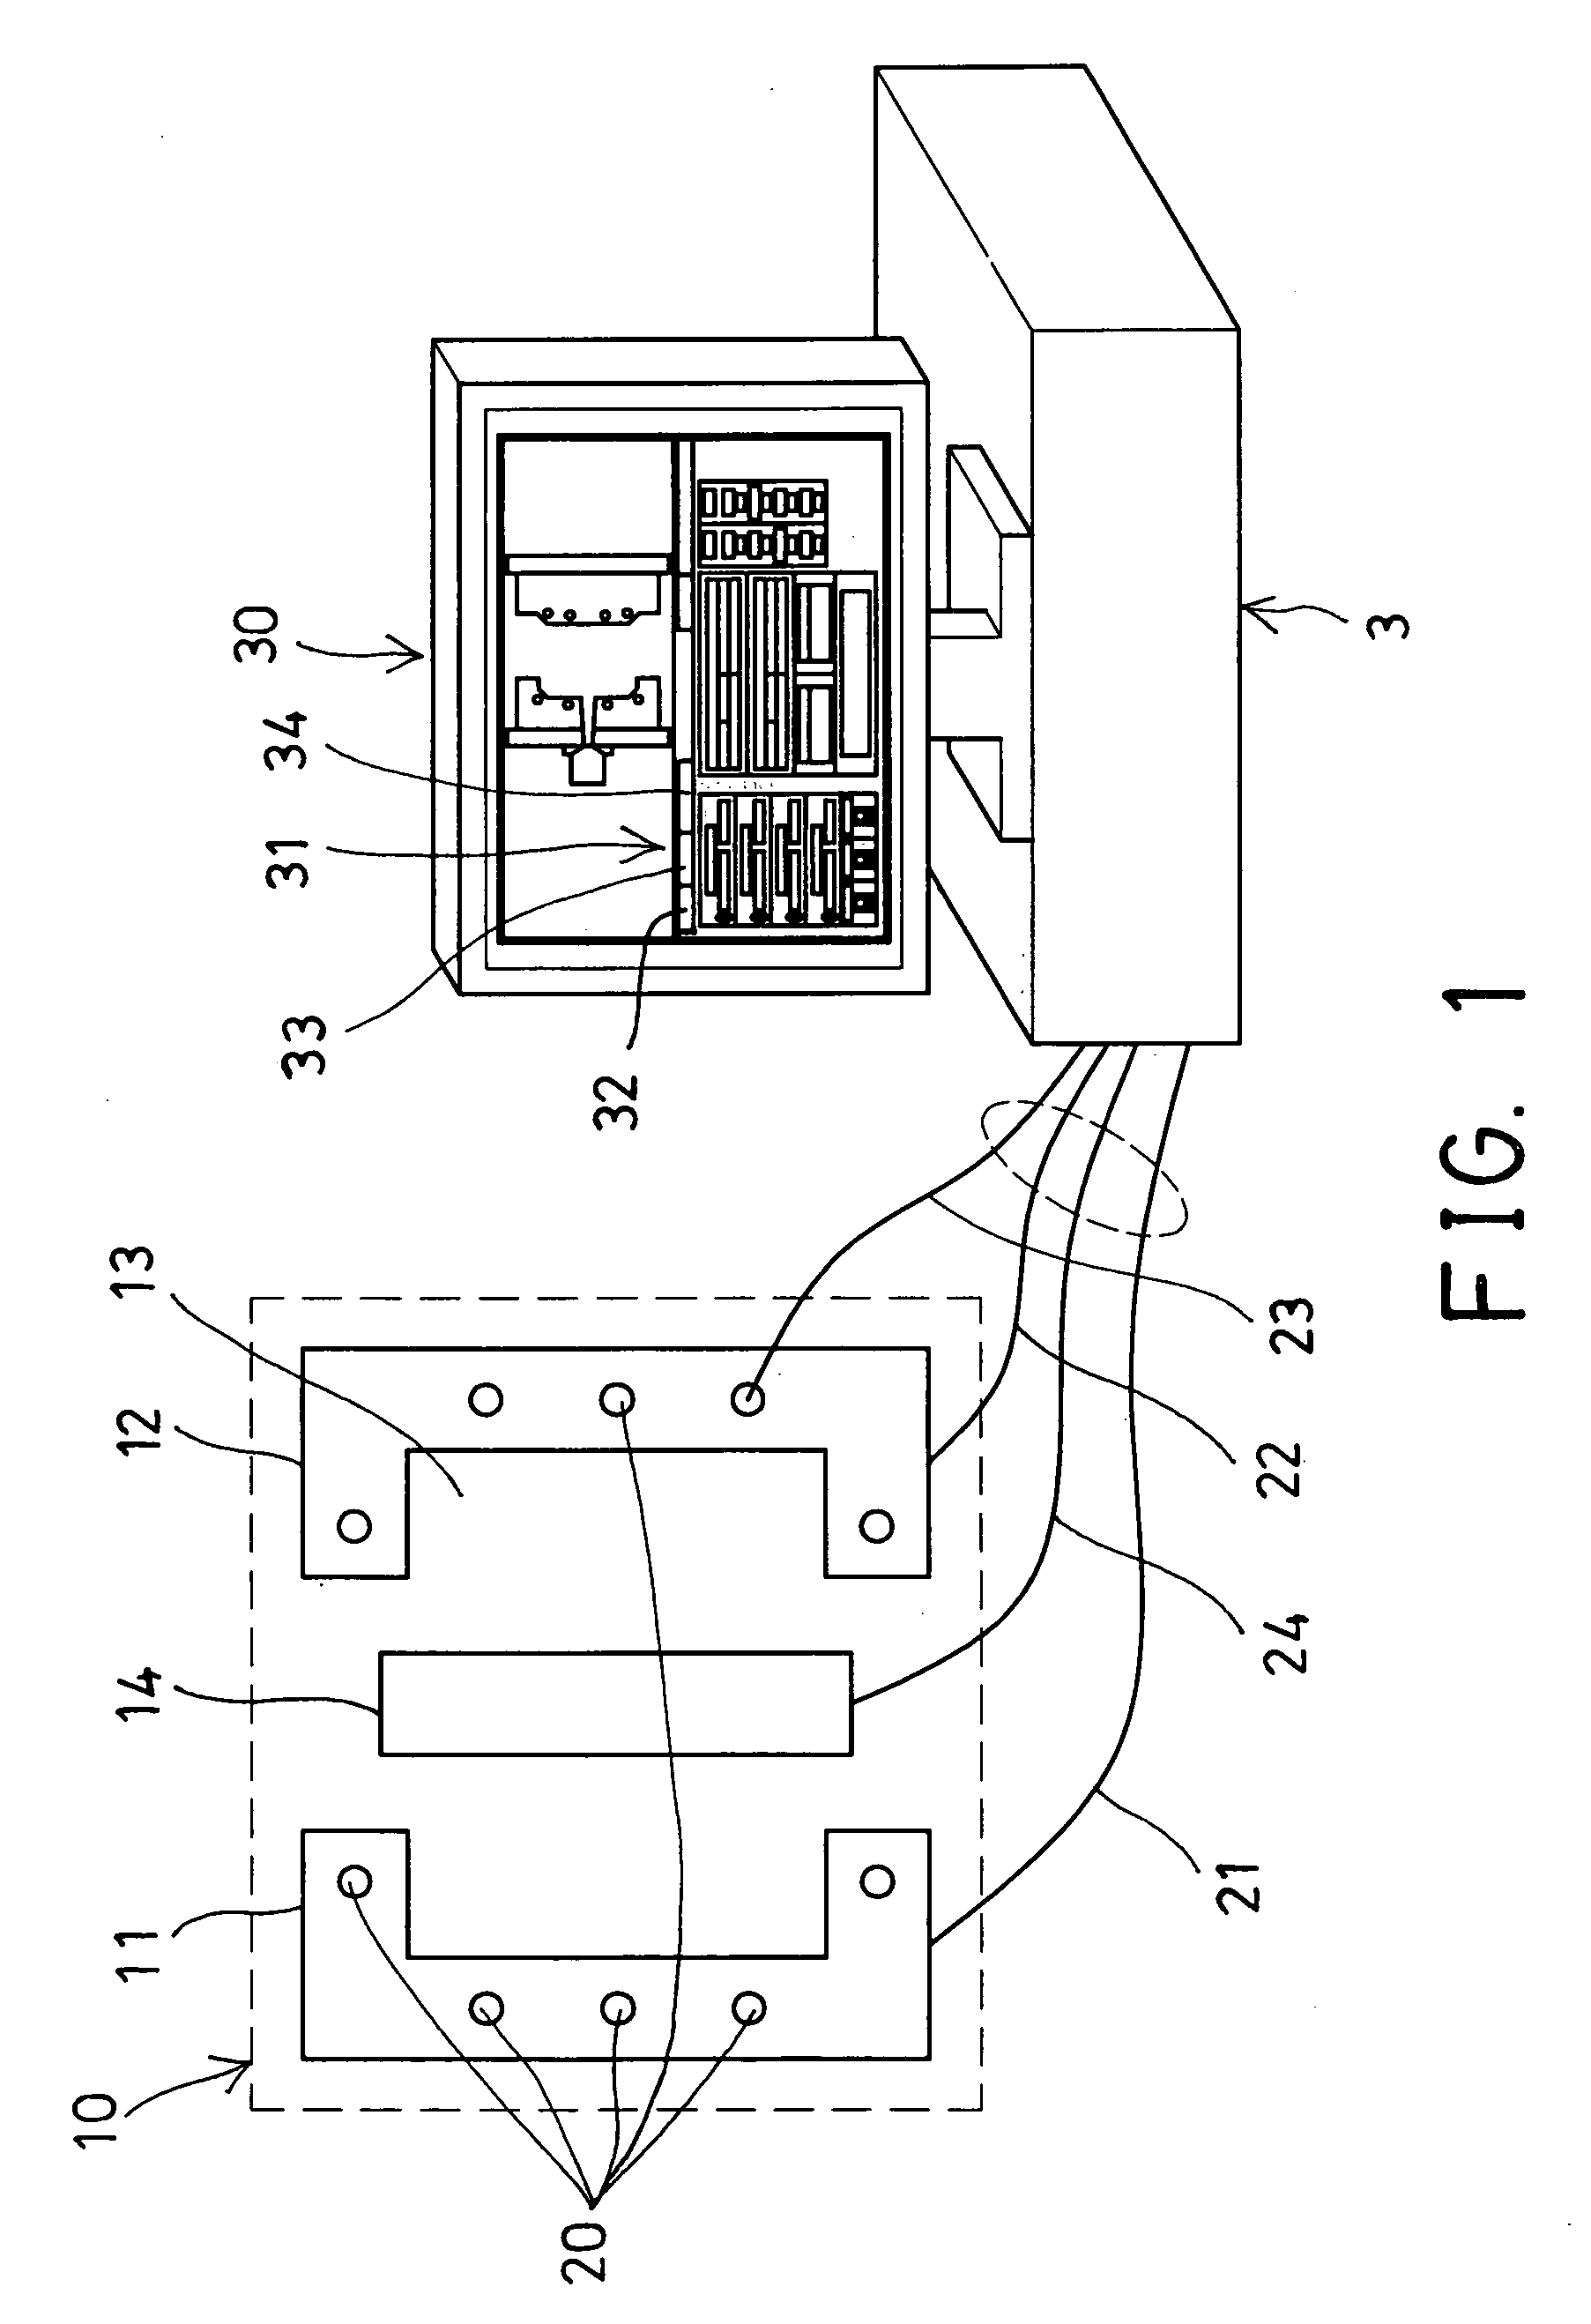 Temperature control system for molding facility